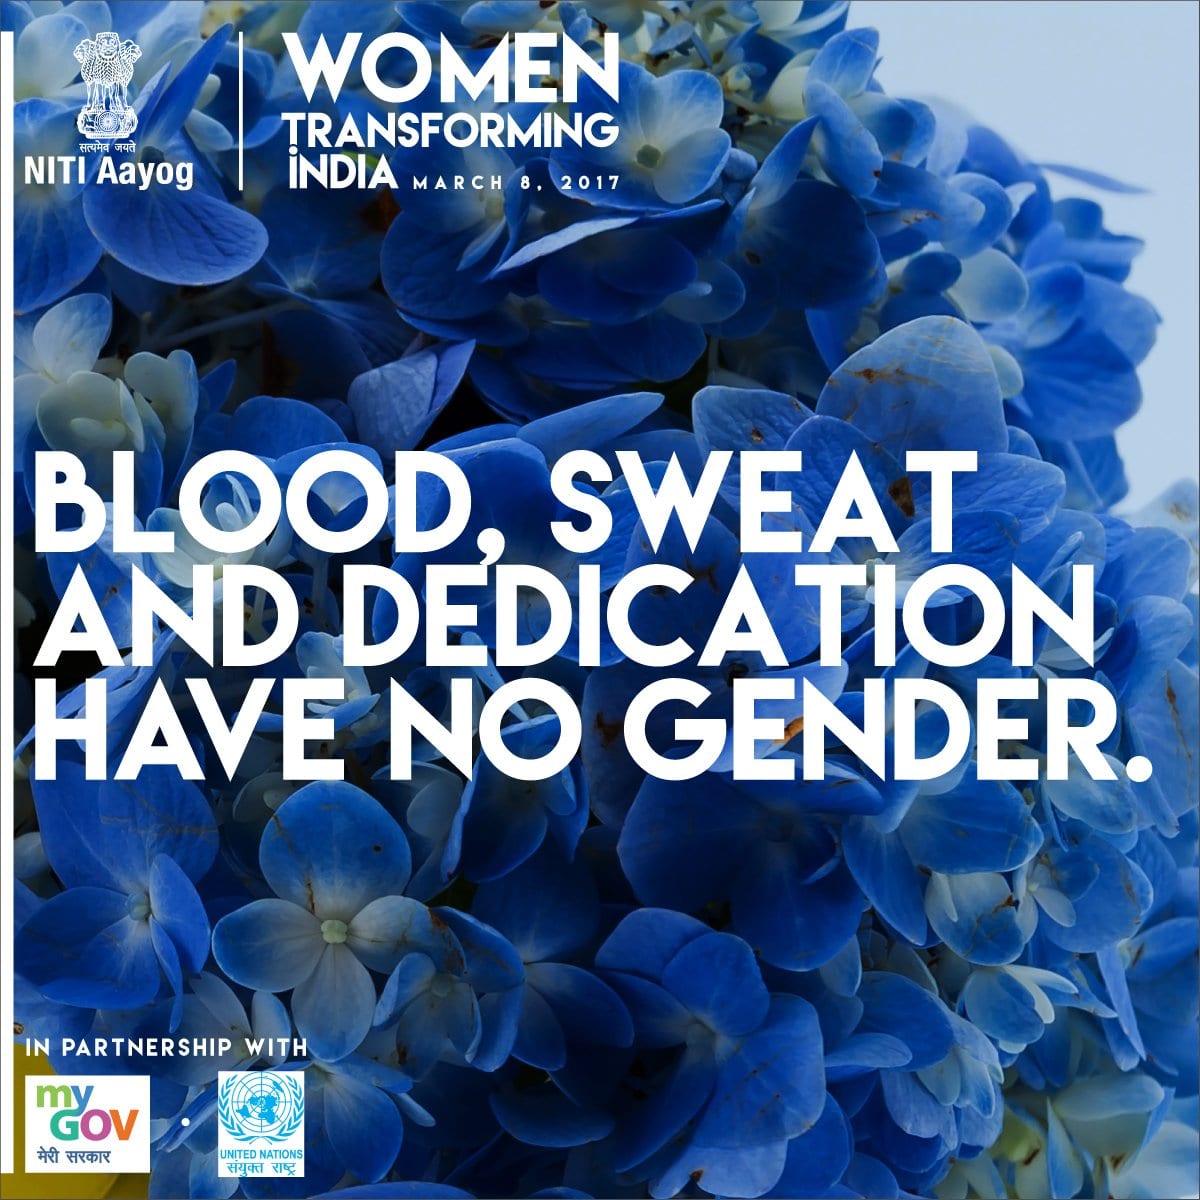 NITI Aayog launches the 2nd edition of Women Transforming India – celebrating women who are breaking the glass ceiling